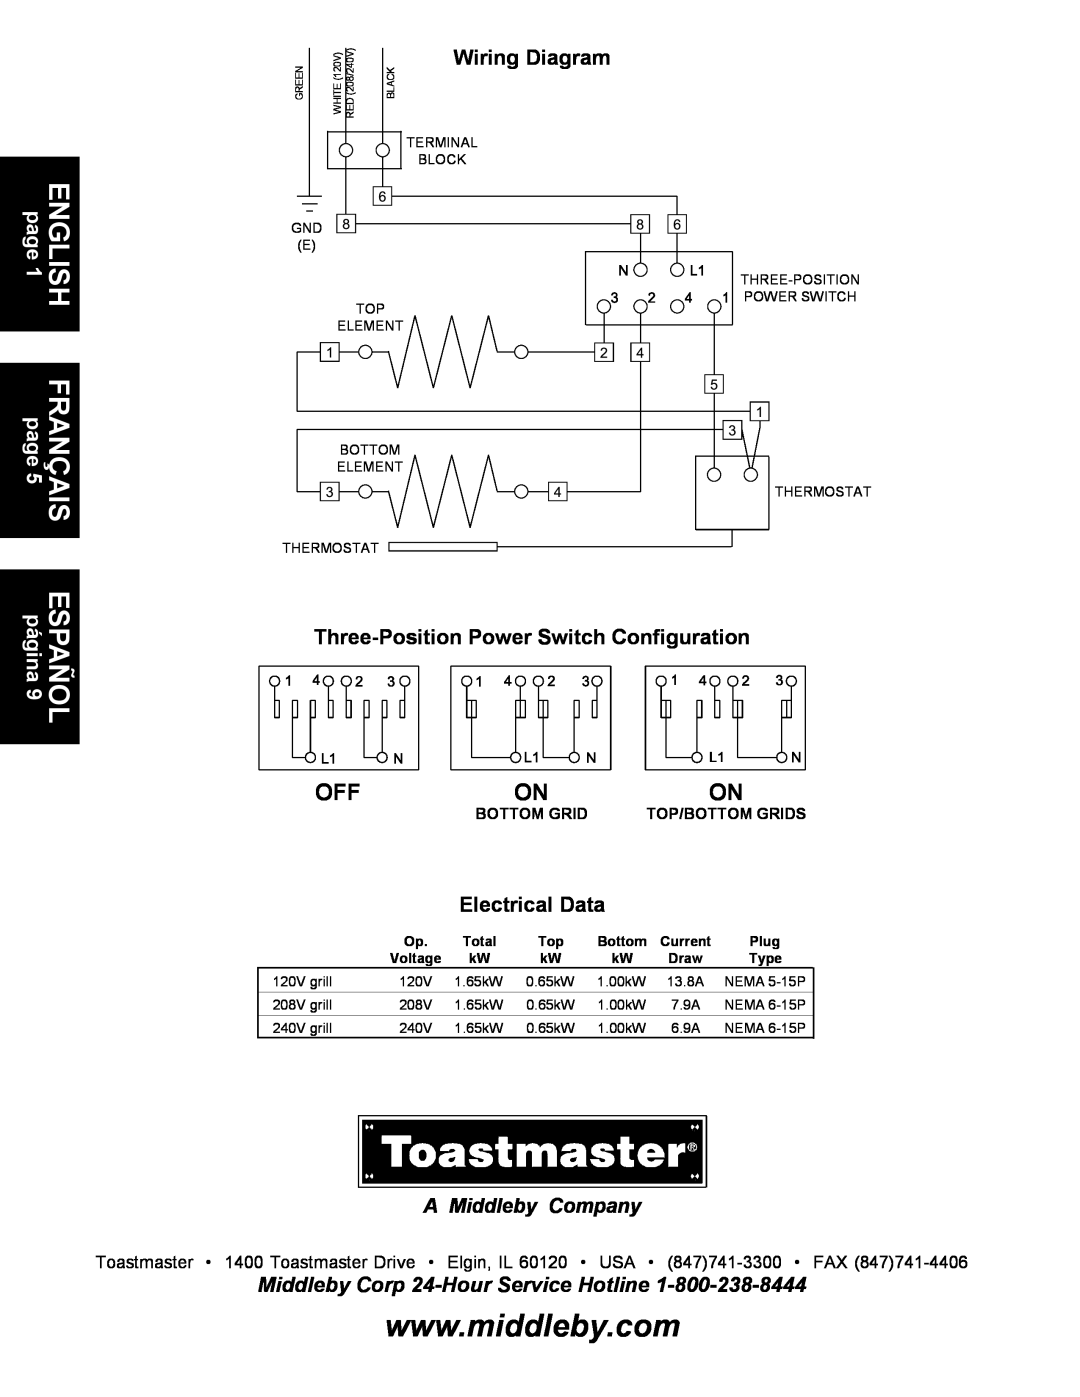 Toastmaster A710P, A710LP Wiring Diagram, Three-Position Power Switch Configuration, Electrical Data, A Middleby Company 